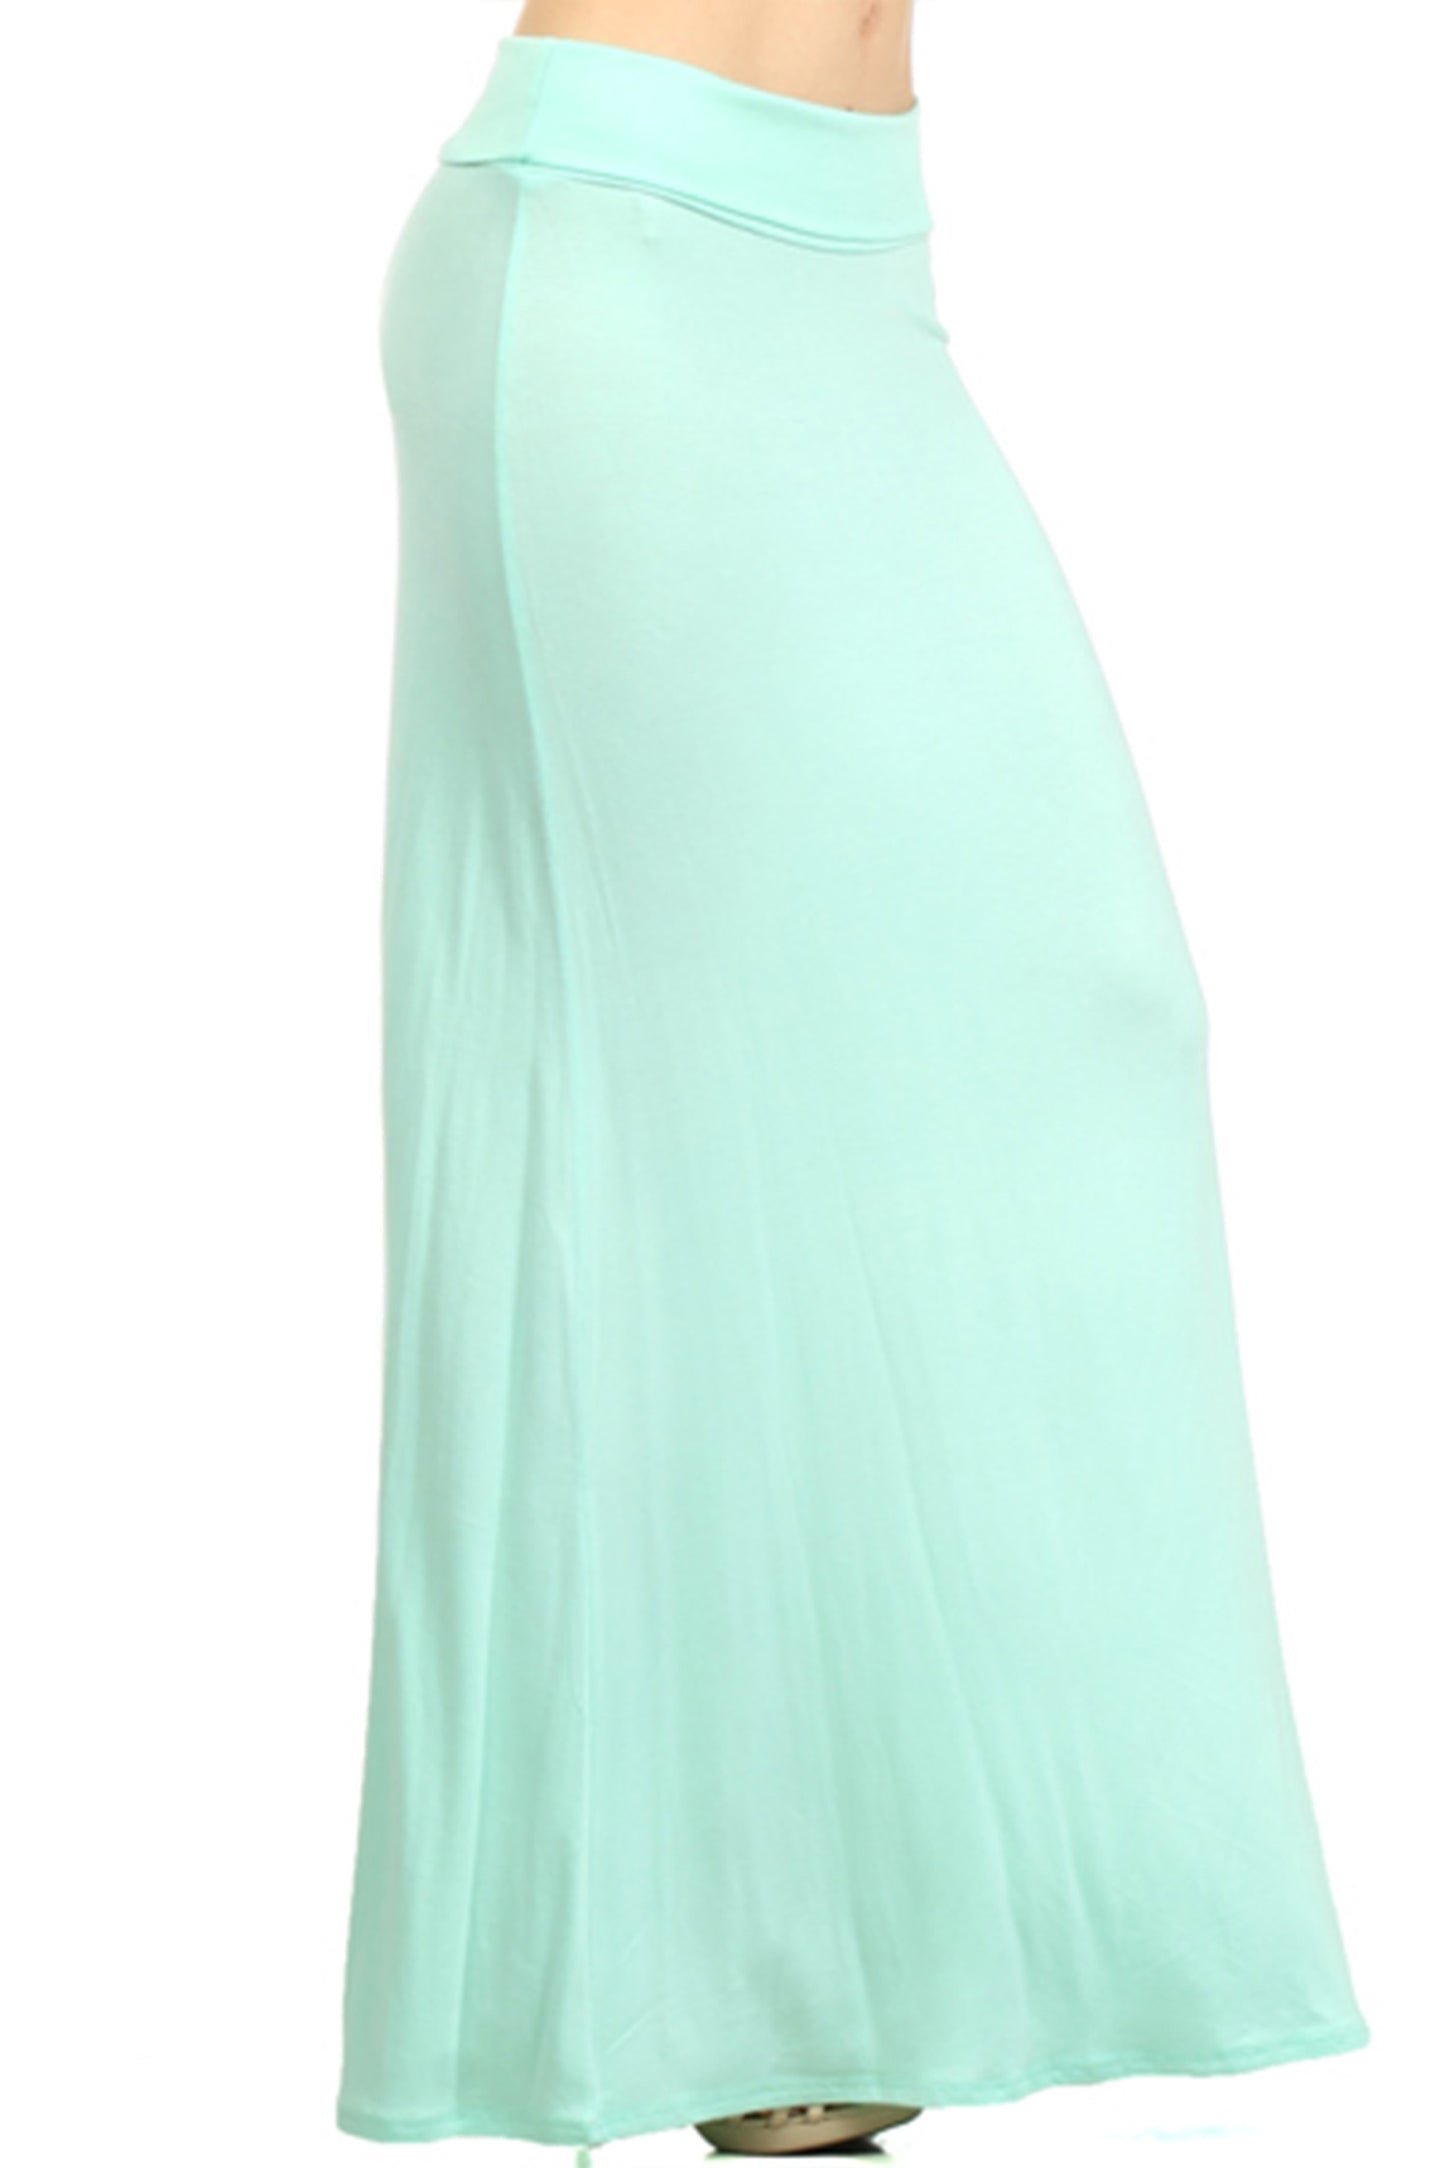 Women's Chic and Comfortable High-Waisted Maxi Skirt